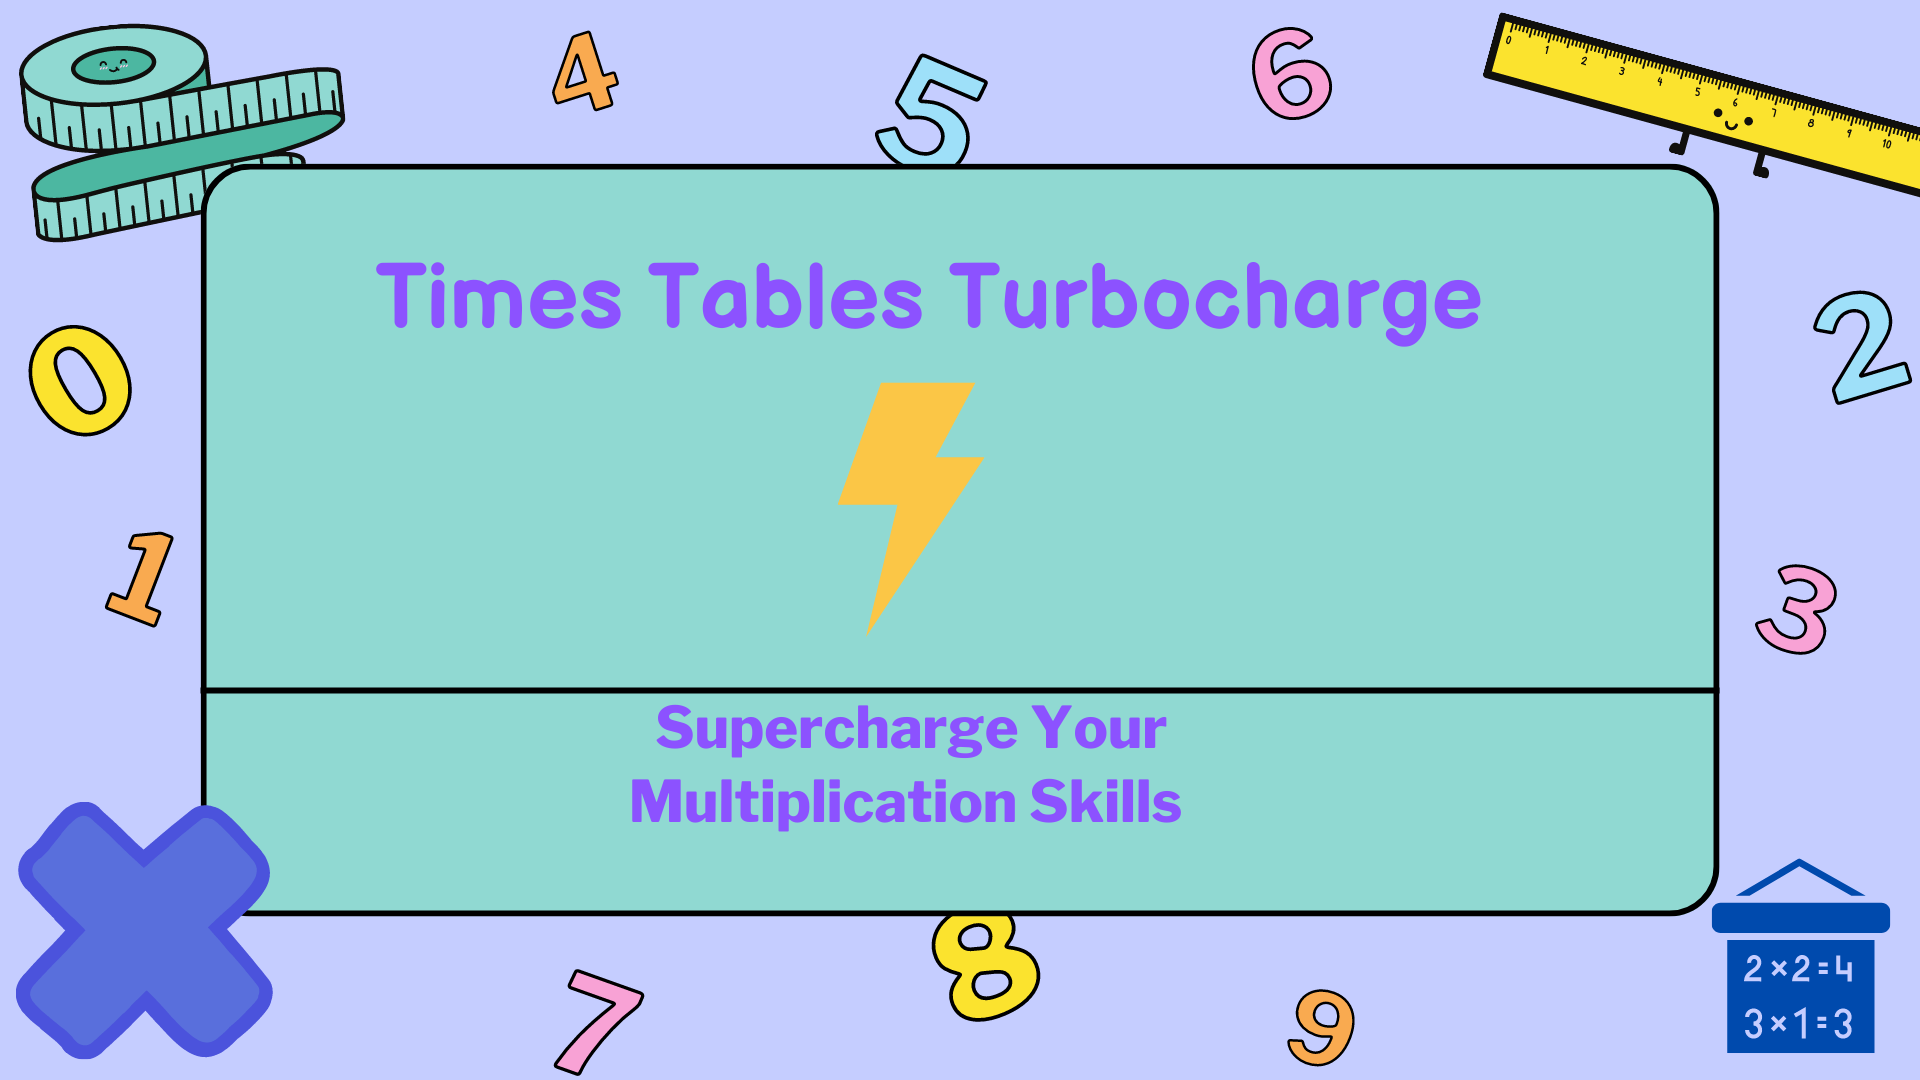 Times Tables Turbocharge: Supercharge Your Multiplication Skills with Our Rapid Boot Camp